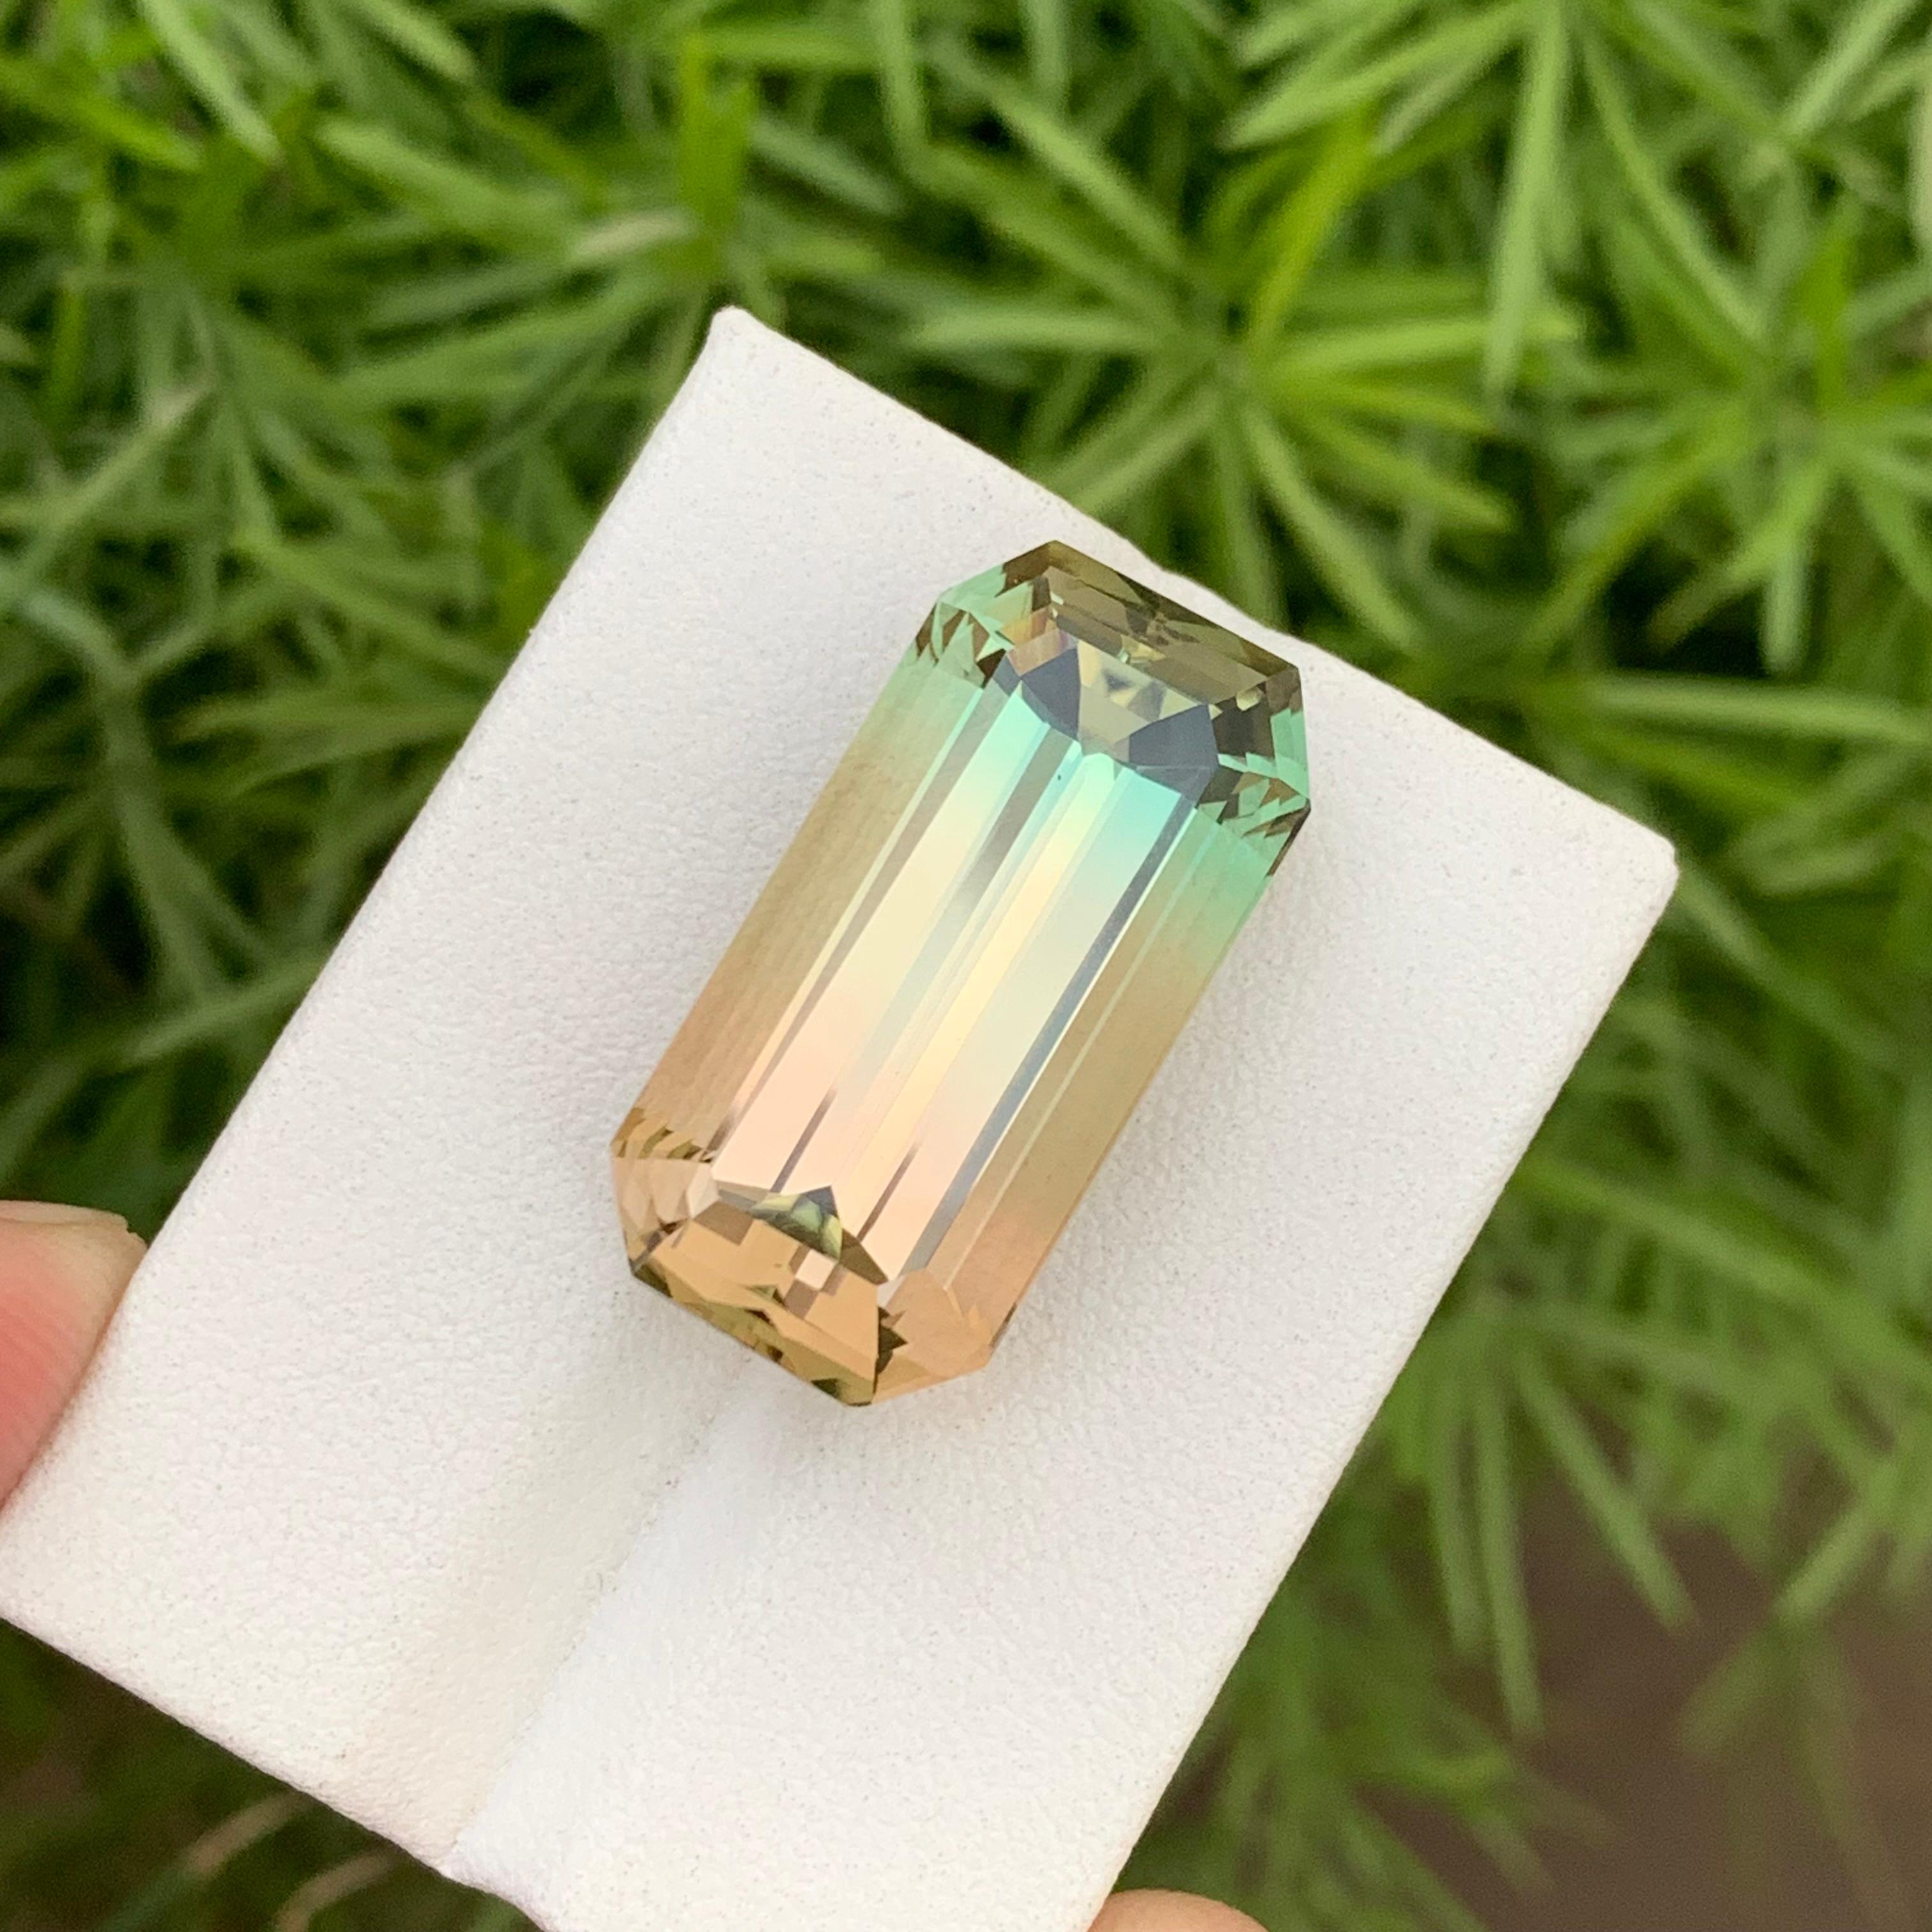 27.35 Carats Natural Loose Bicolor Tourmaline 24 Mm Long For Necklace Jewellery  For Sale 7